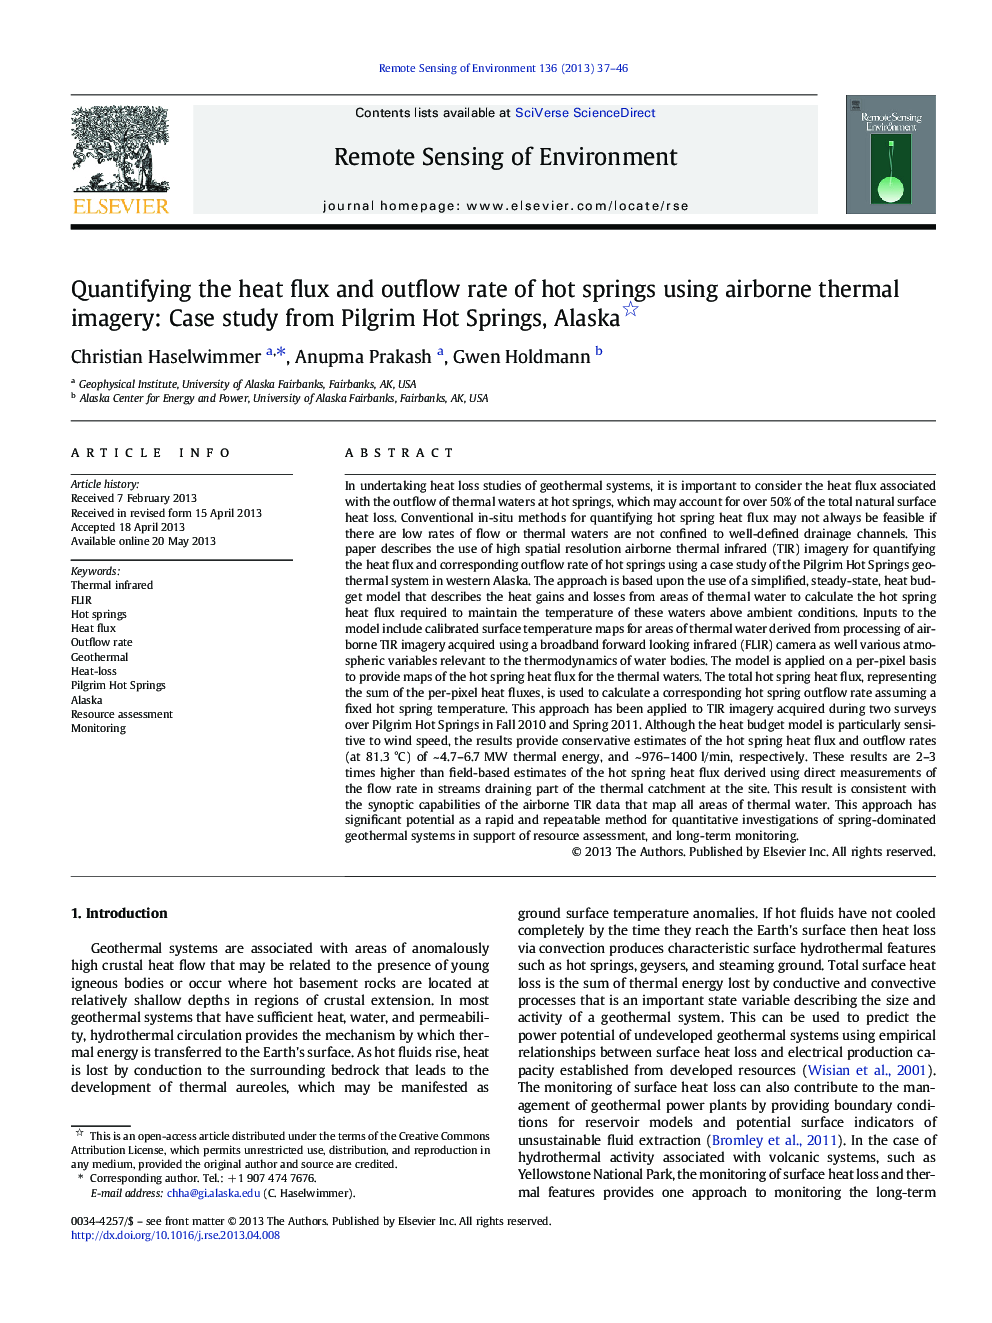 Quantifying the heat flux and outflow rate of hot springs using airborne thermal imagery: Case study from Pilgrim Hot Springs, Alaska